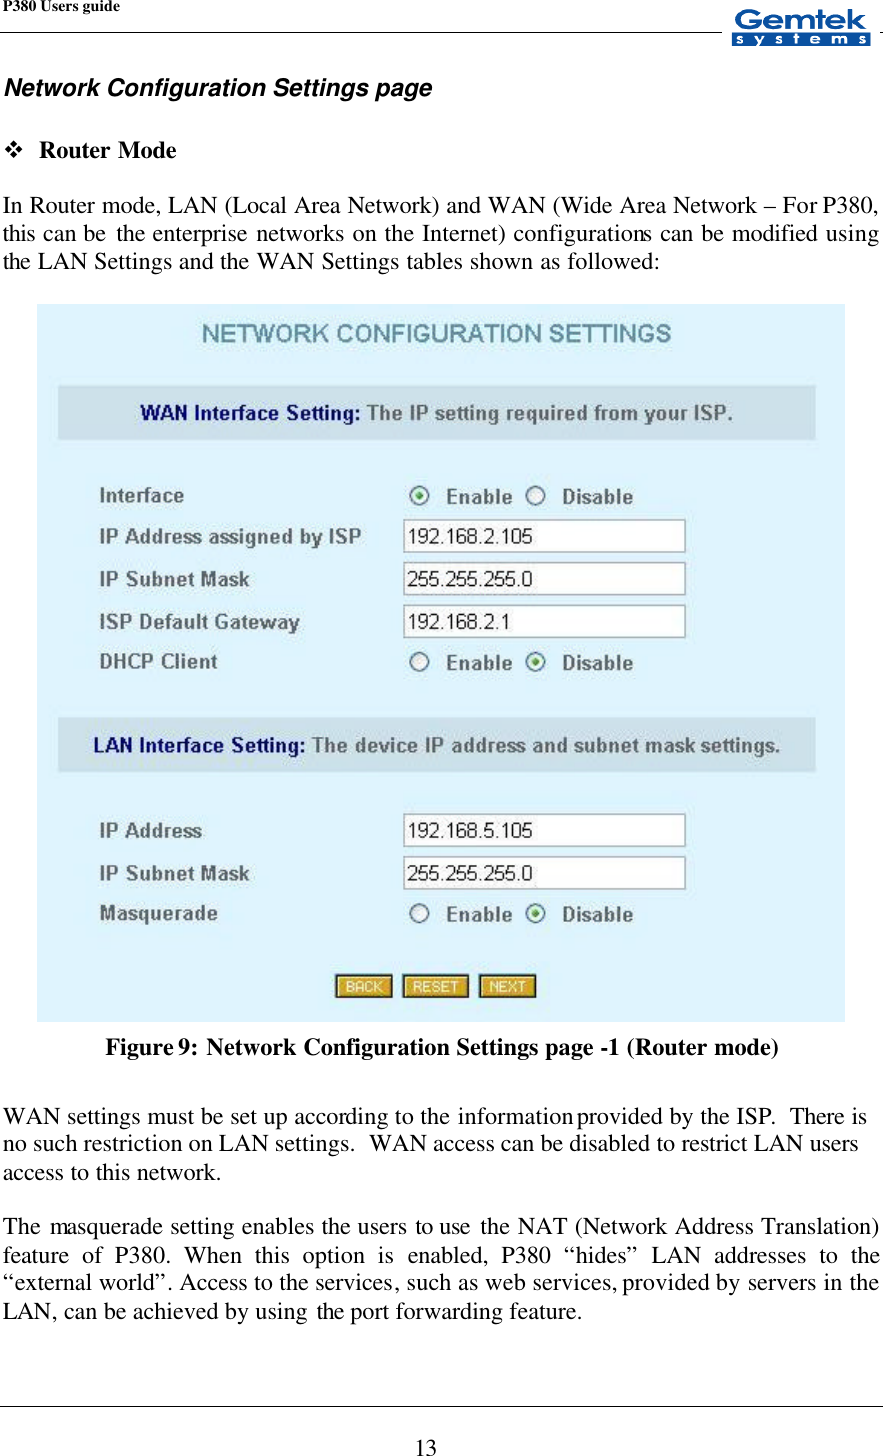 P380 Users guide            13 Network Configuration Settings page  v Router Mode  In Router mode, LAN (Local Area Network) and WAN (Wide Area Network – For P380, this can be  the enterprise networks on the Internet) configurations can be modified using the  LAN Settings and the WAN Settings tables shown as followed:   Figure 9: Network Configuration Settings page -1 (Router mode)  WAN settings must be set up according to the information provided by the ISP.  There is no such restriction on LAN settings.  WAN access can be disabled to restrict LAN users access to this network.  The masquerade setting enables the users to use  the NAT (Network Address Translation) feature of P380. When this option is  enabled, P380 “hides” LAN addresses to the “external world”. Access to the services, such as web services, provided by servers in the LAN, can be achieved by using the port forwarding feature.  